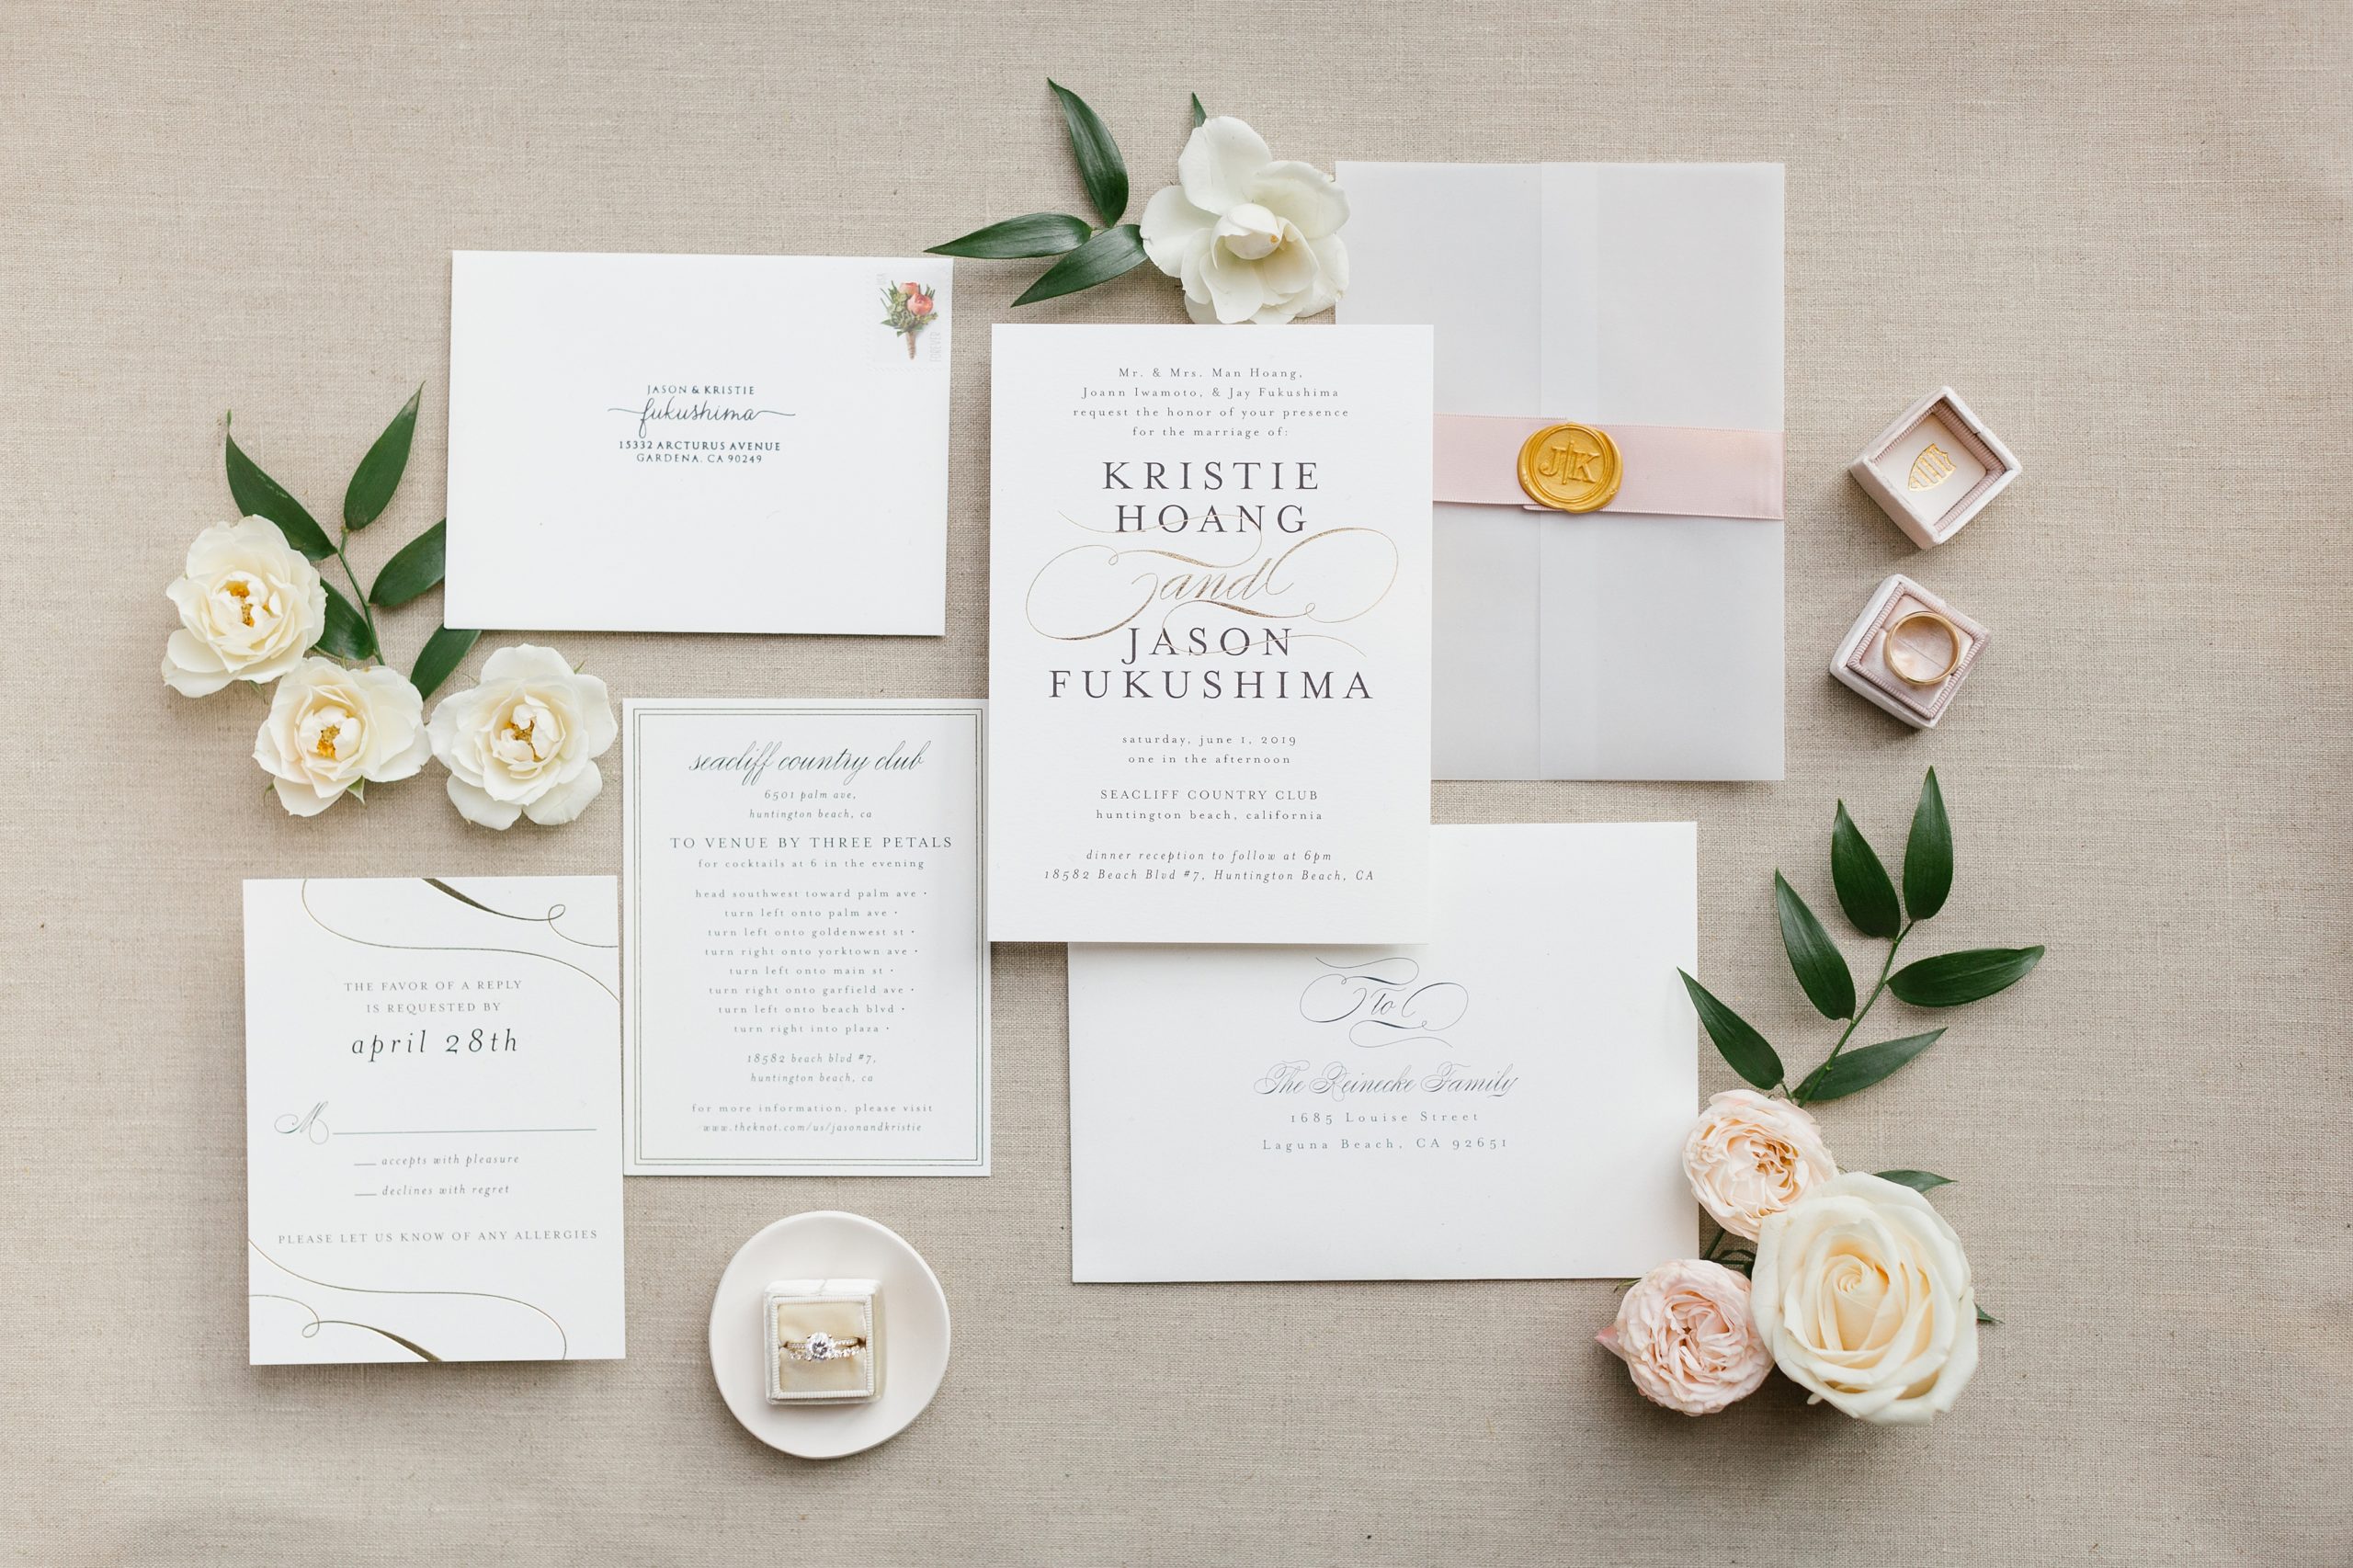 Clean and classic wedding invitation suite from Minted